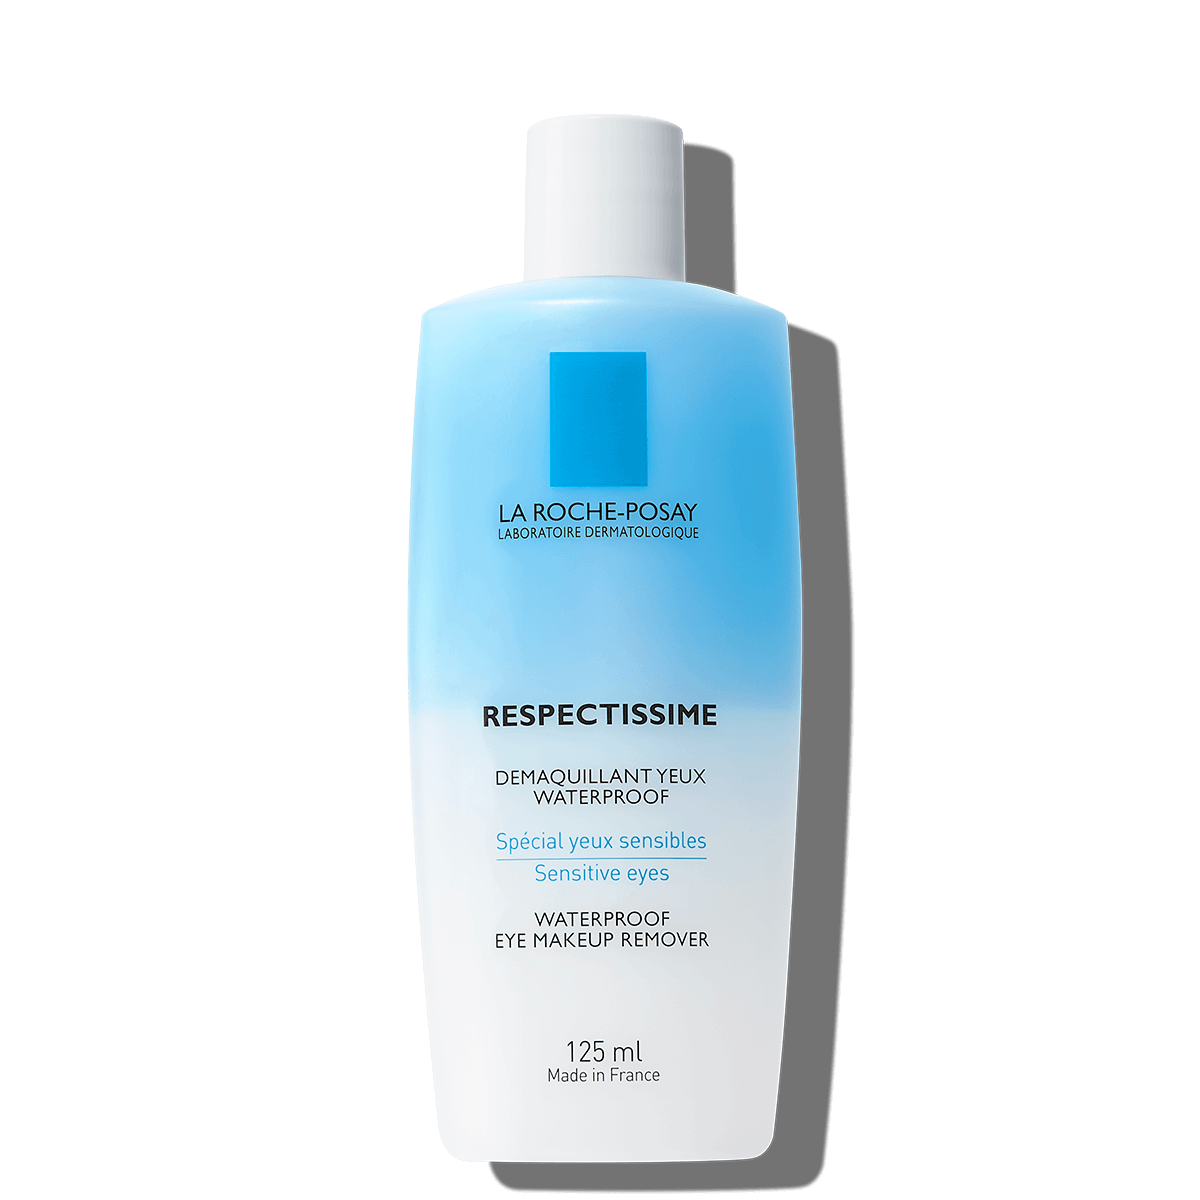 La-Roche-Posay-Respectissime-Eye-Make-Up-Remover-125ml-3433422401907-Front